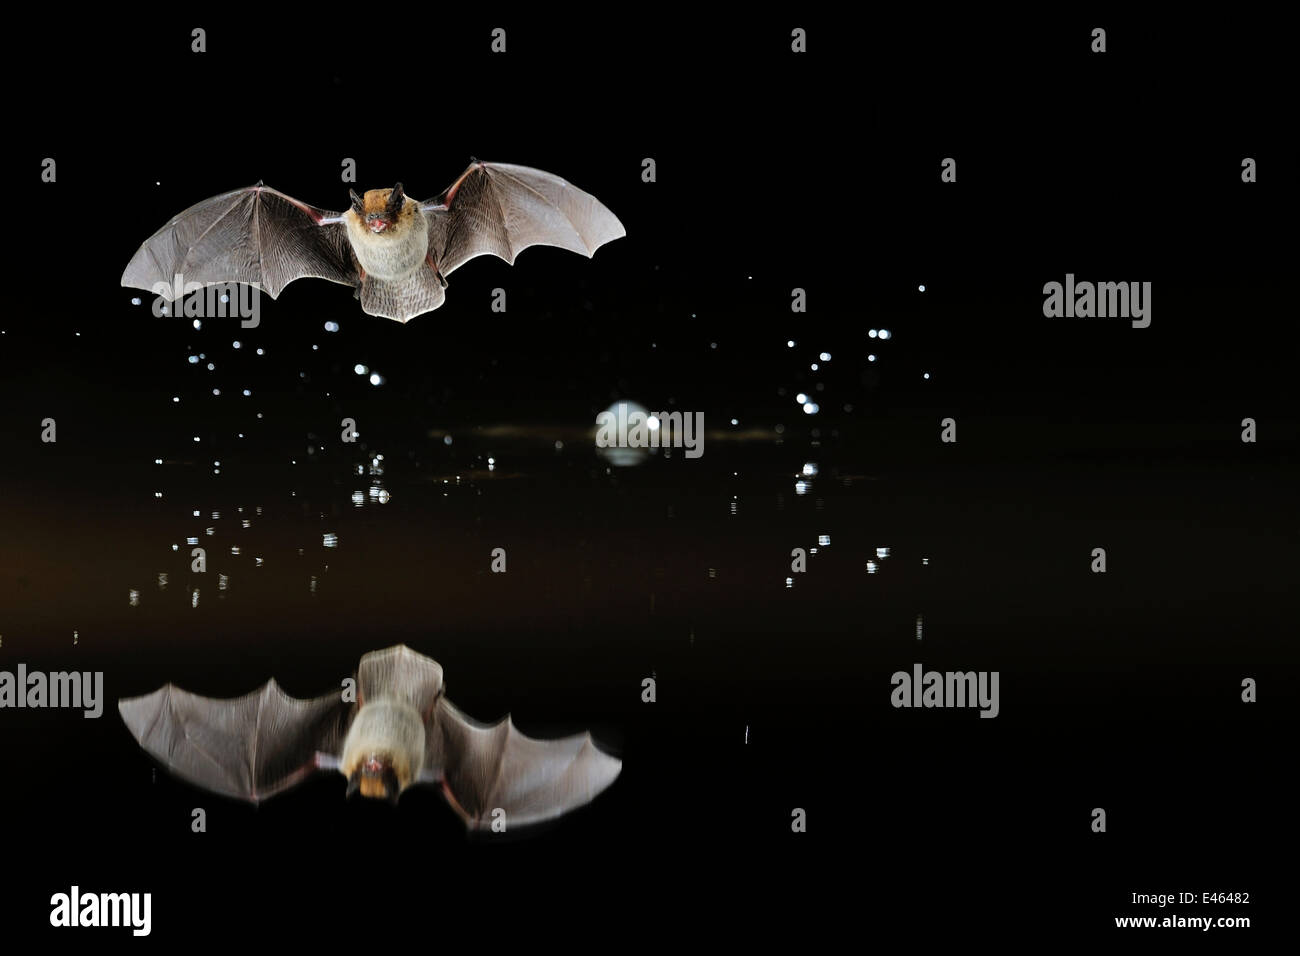 Kuhl's Pipistrelle Bat (Pipistrelle kuhlii) in flight low over water, with splash from drinking in flight. France, Europe, May. Stock Photo